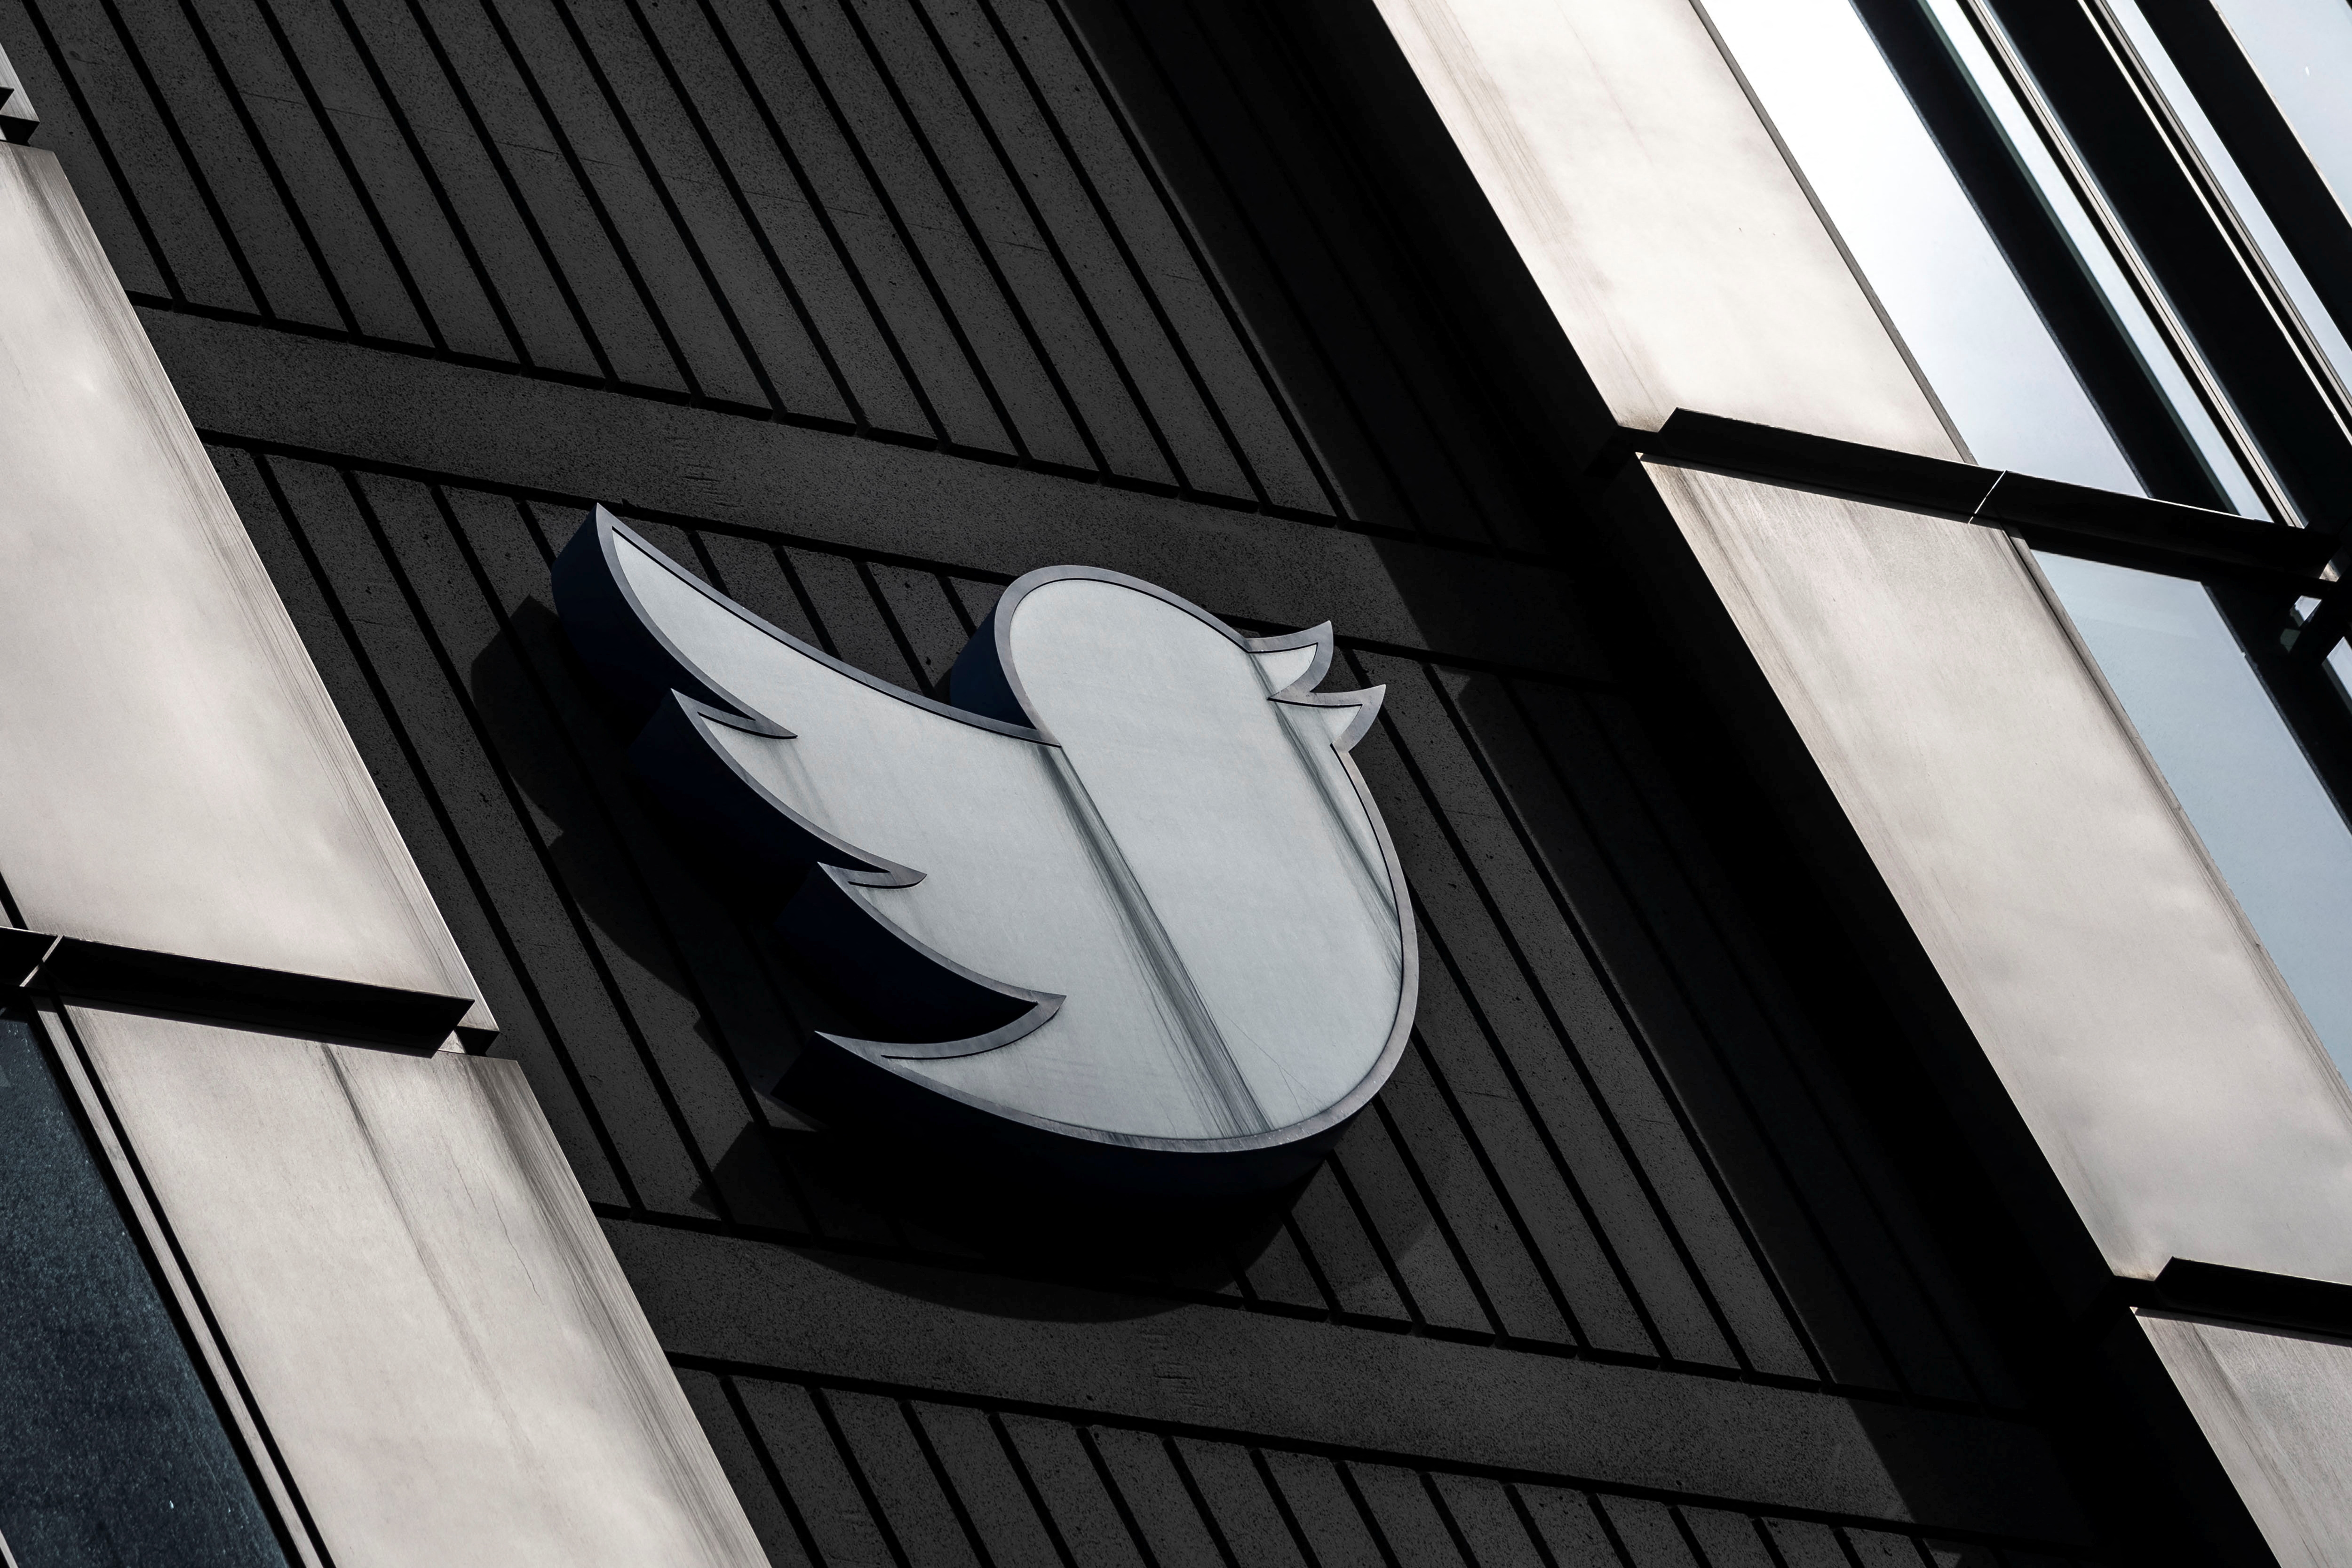 Twitter reportedly cuts contract workforce following mass layoffs | Engadget